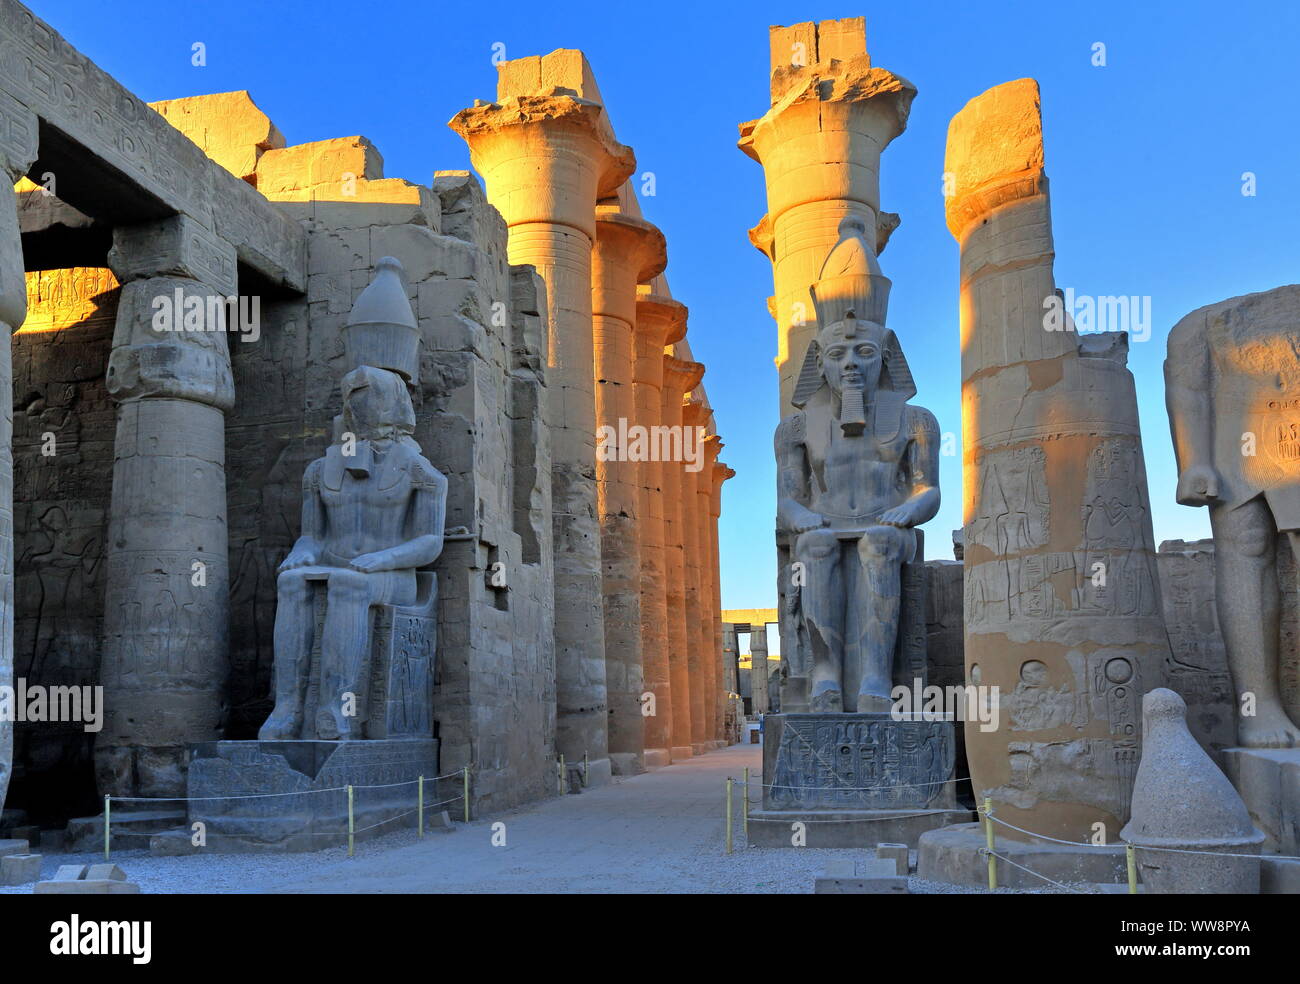 Statues of Ramses II in the First Court and Colonnade, Luxor Temple, Luxor, Upper Egypt, Egypt Stock Photo